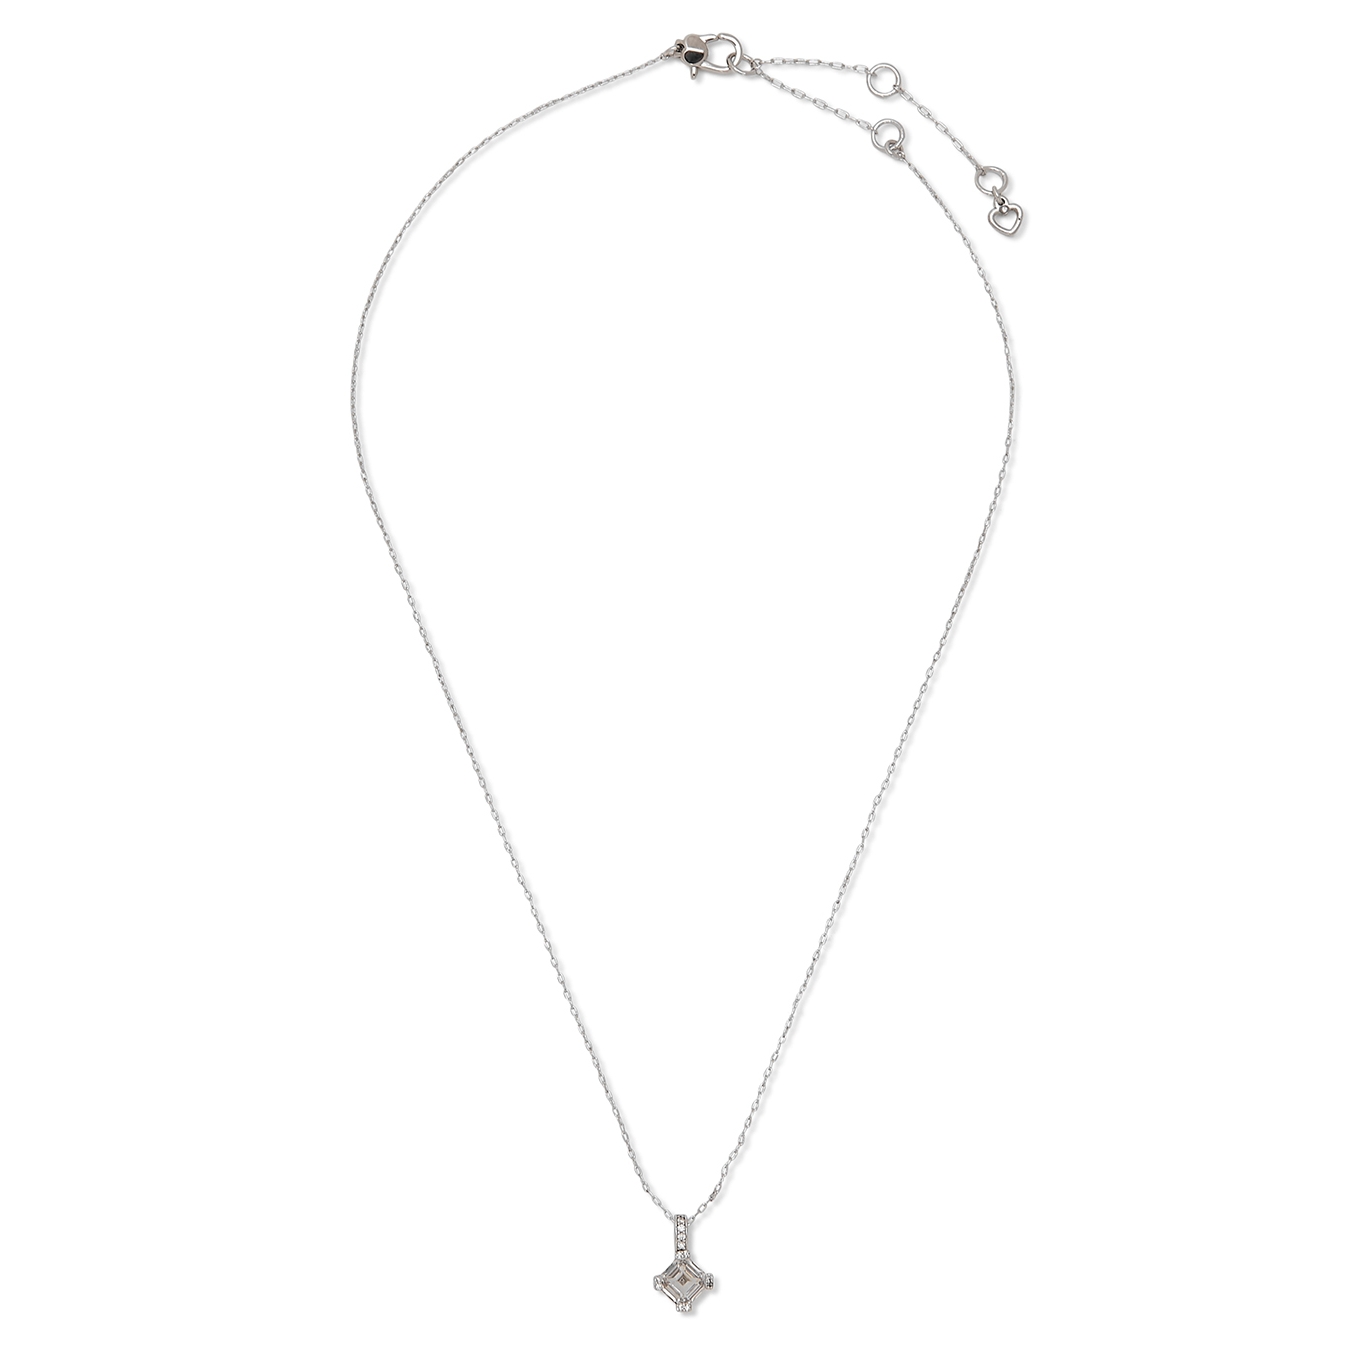 Kate Spade New York crystal-embellished silver-tone necklace - one size